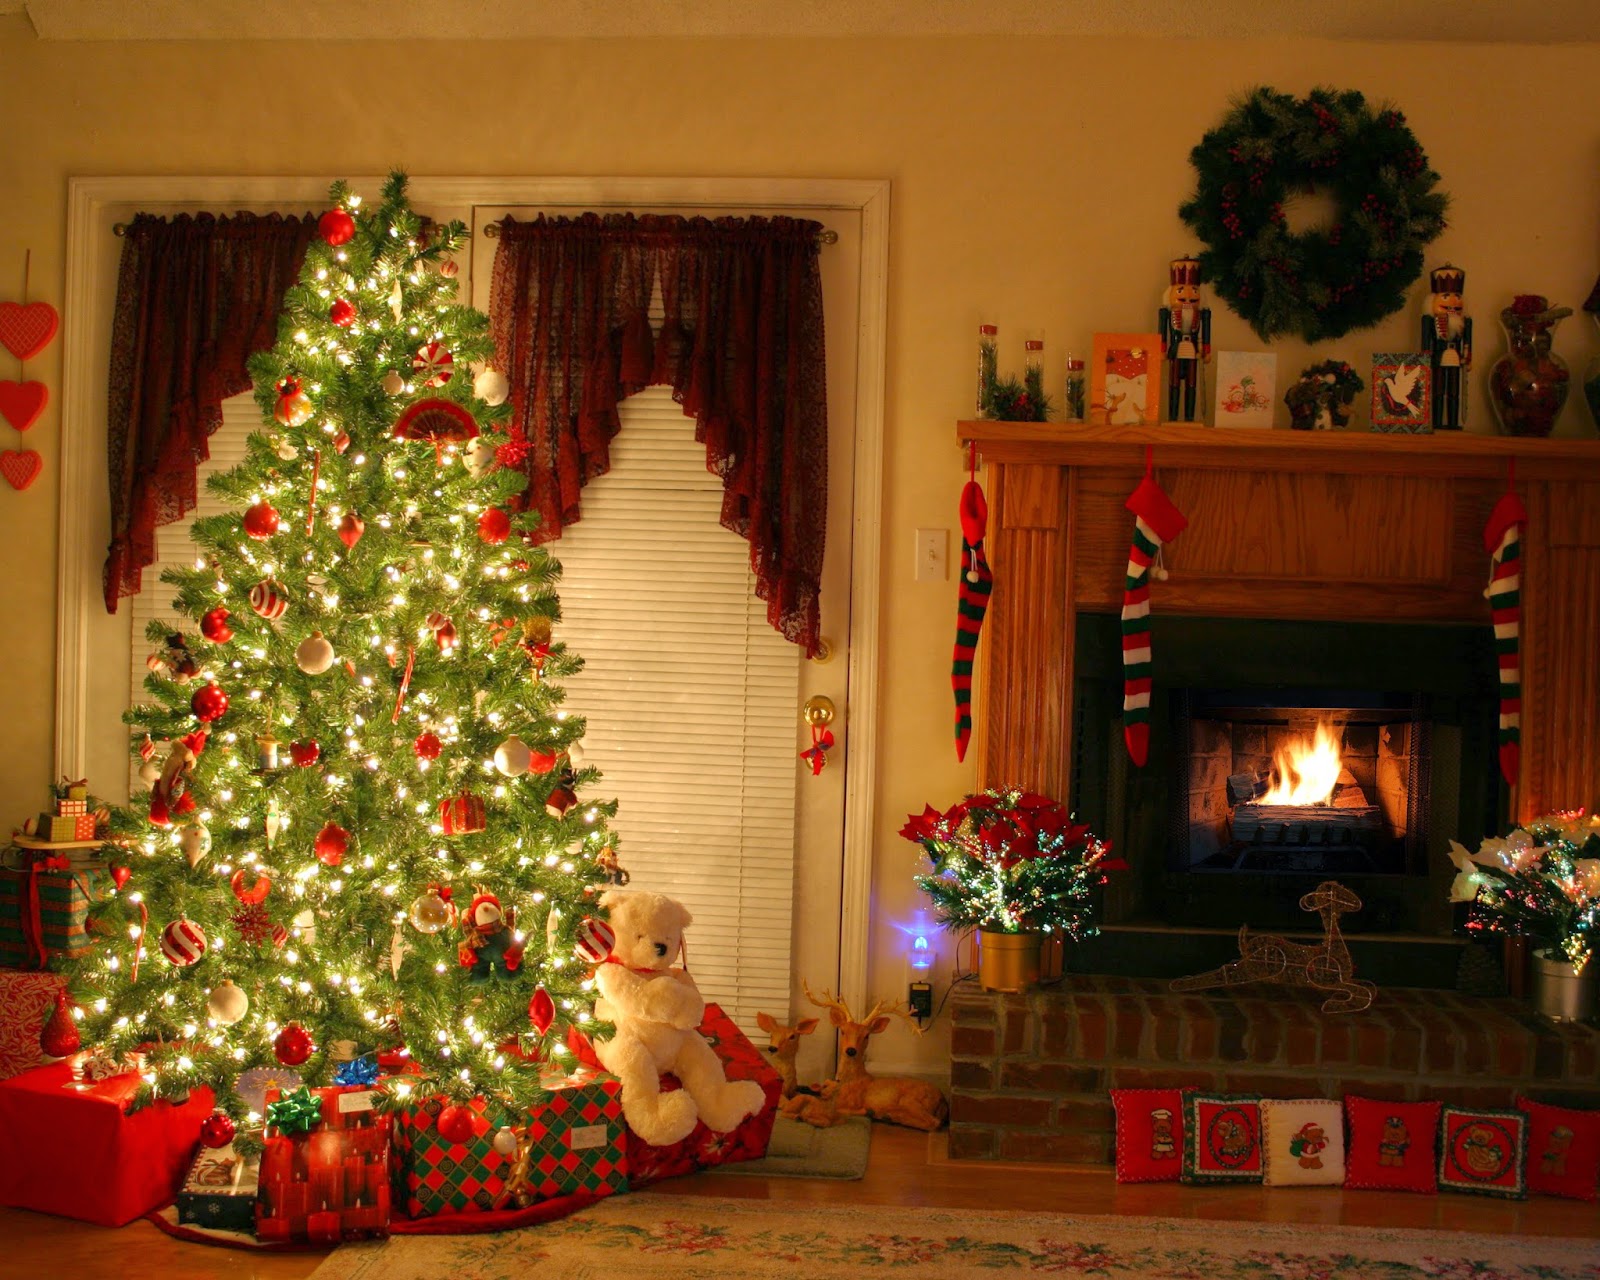 Christmas Fireplace Mantel Decoration Ideas For Home - Santa Caught By Tree - HD Wallpaper 